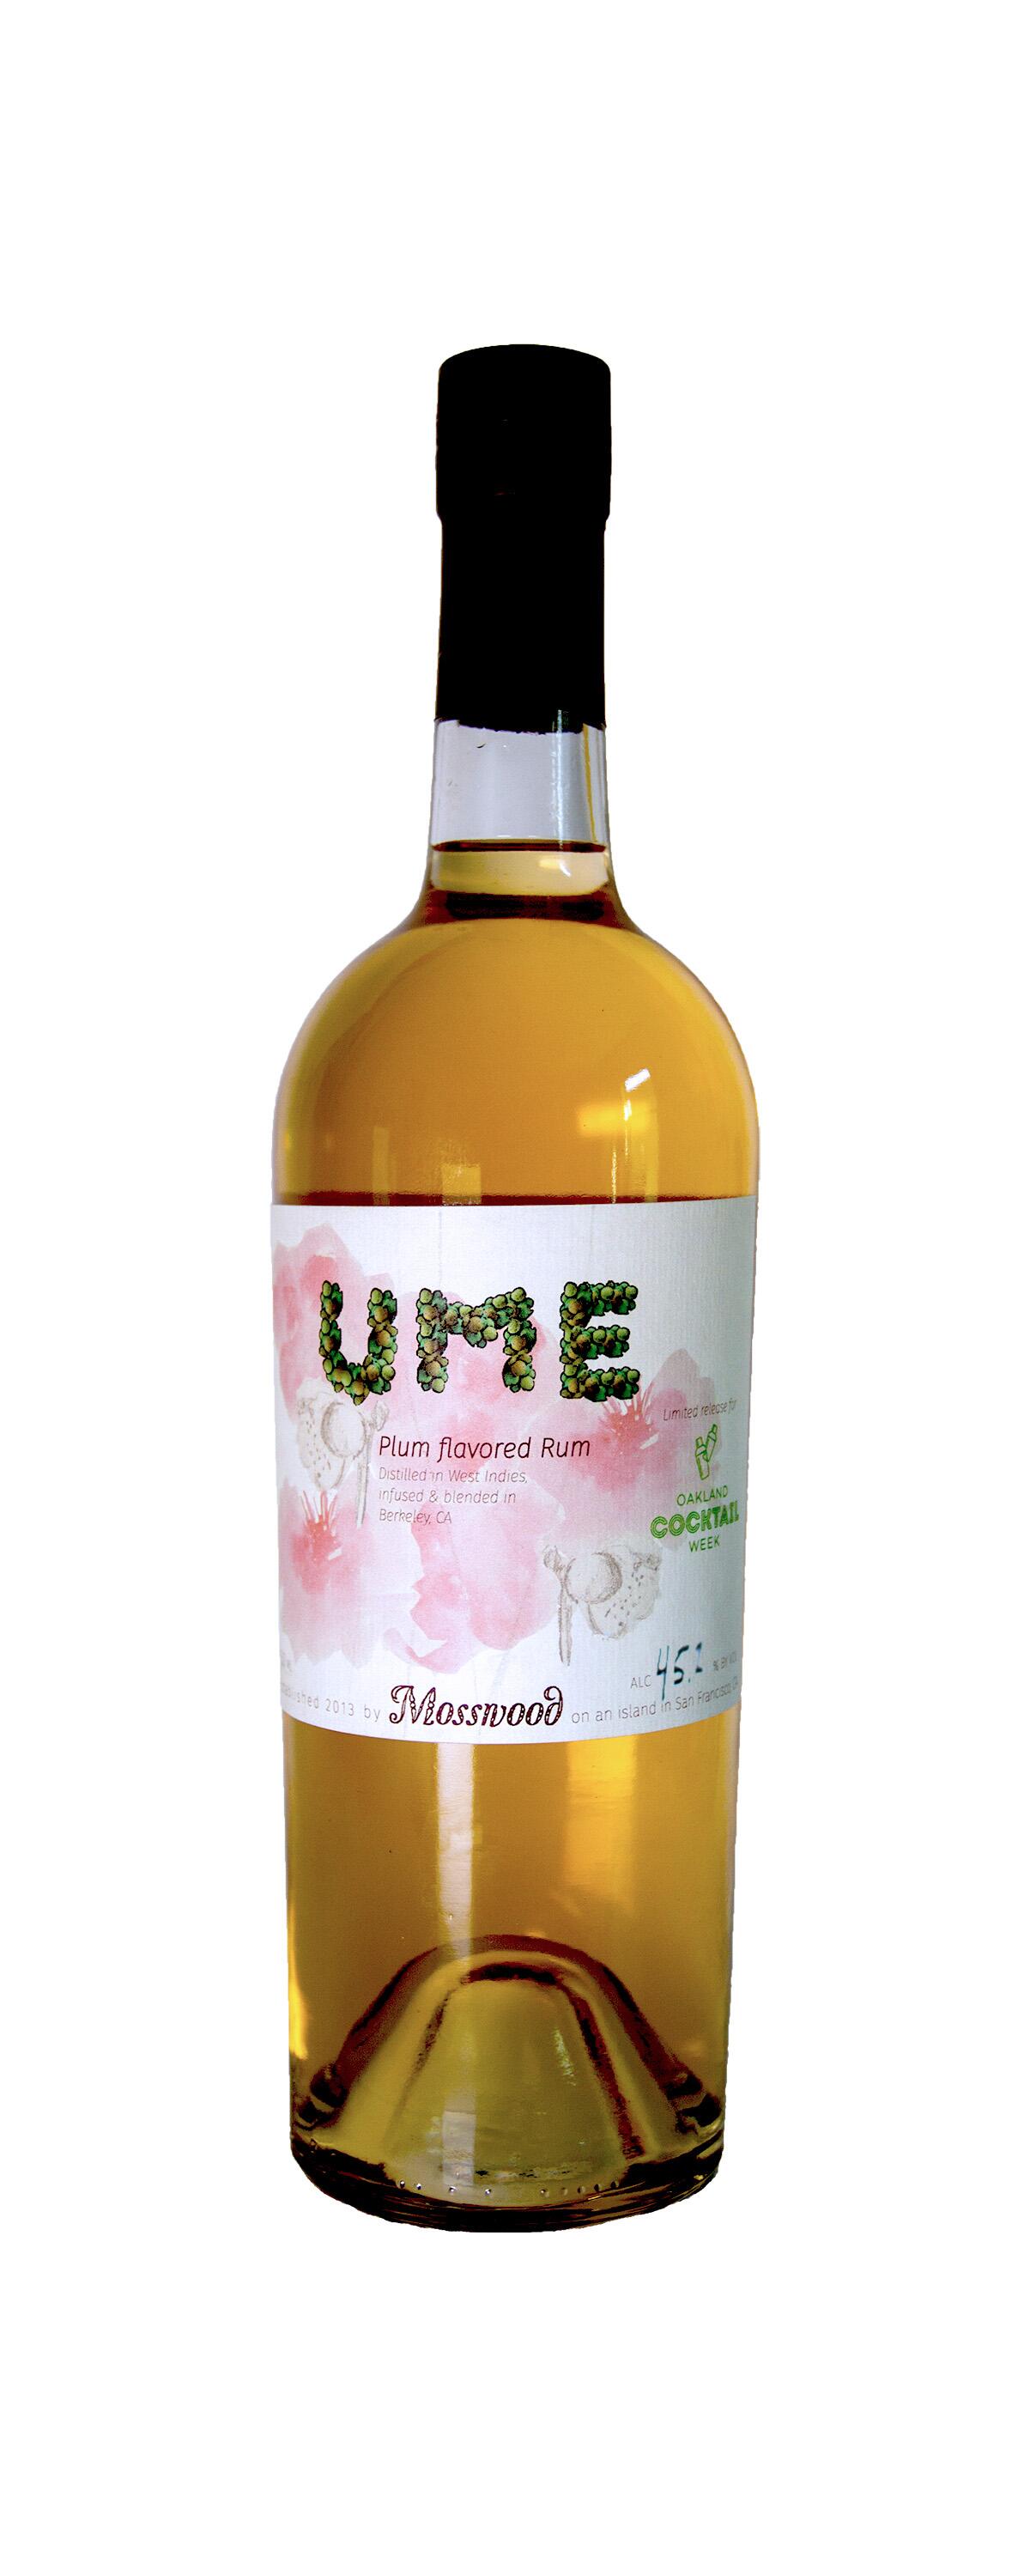 A bottle of Ume rum.